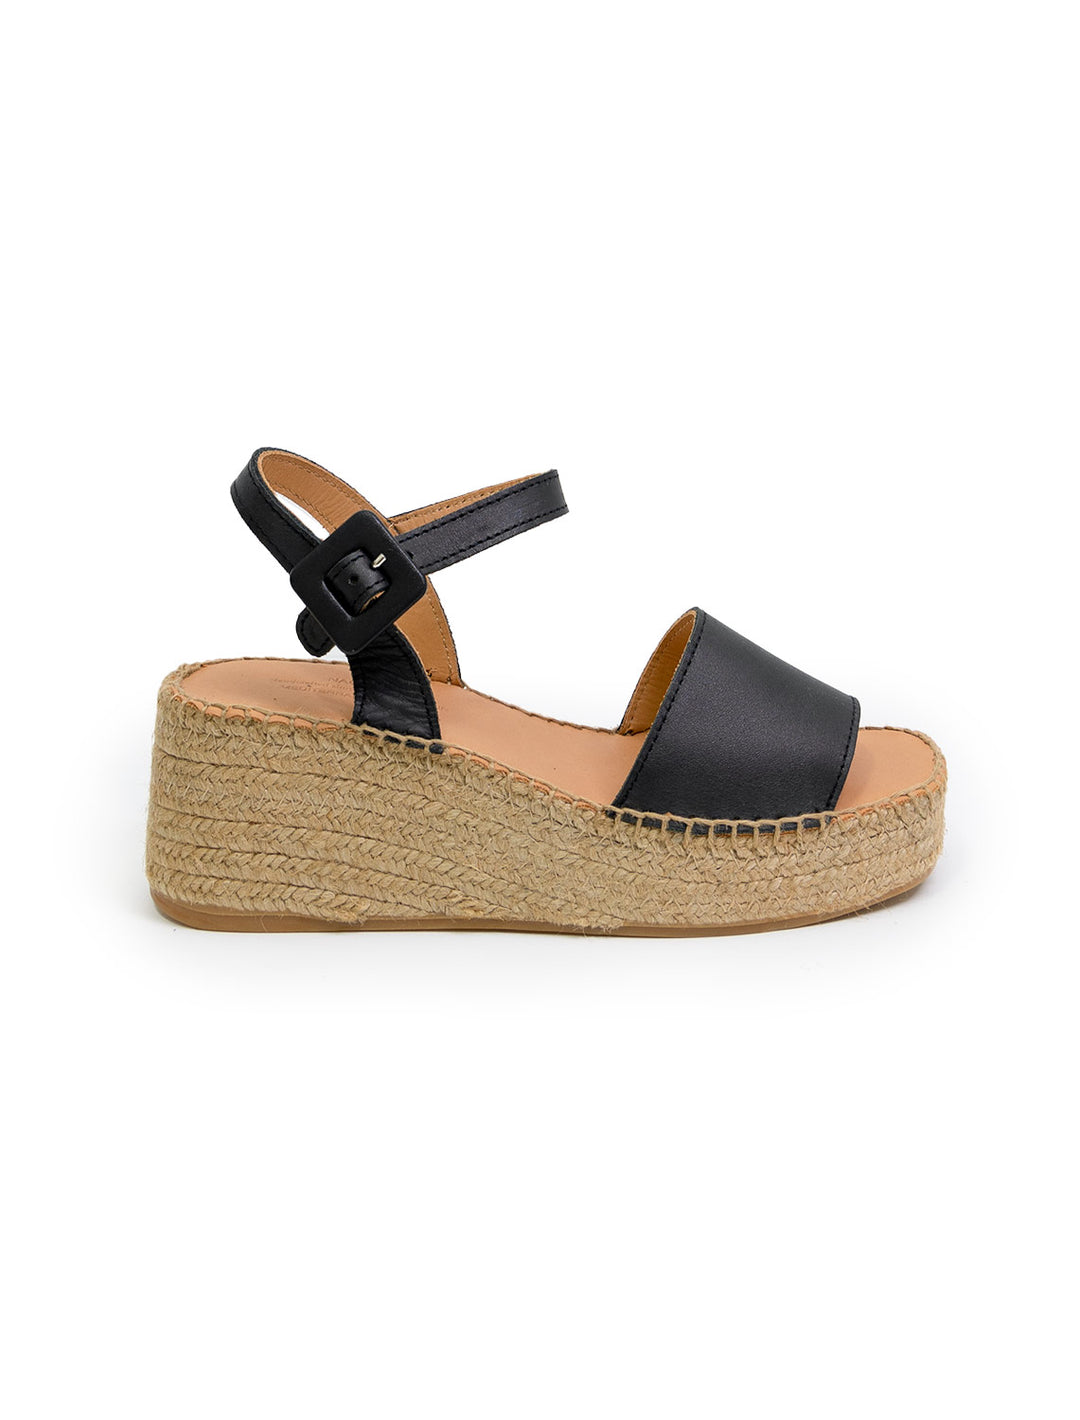 Side view of Naguisa's rall espadrille wedge in black.